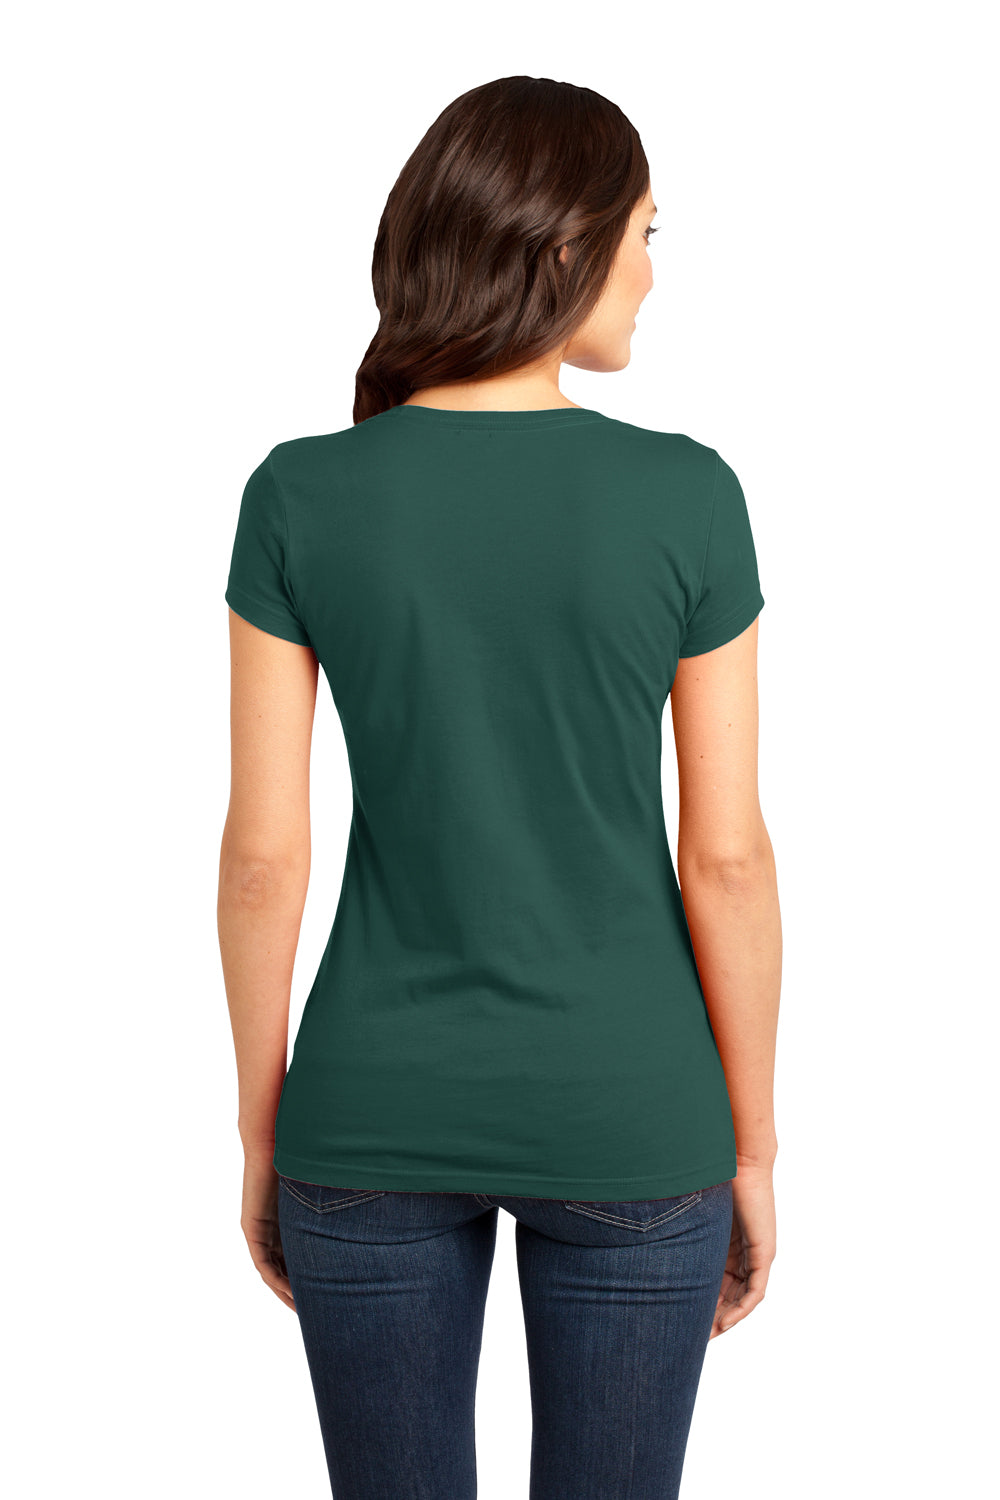 District DT6001 Womens Very Important Short Sleeve Crewneck T-Shirt Evergreen Back